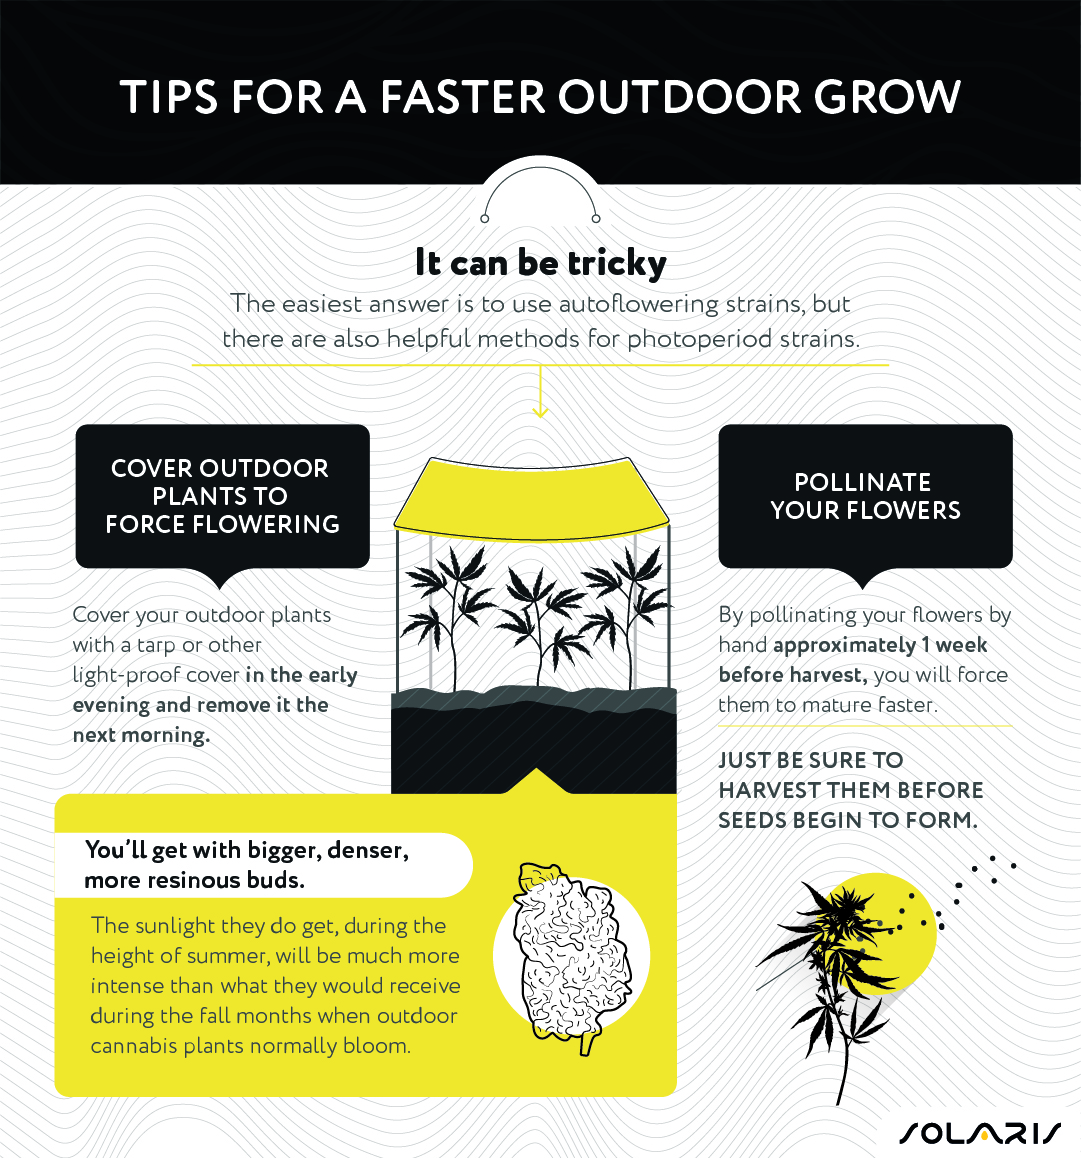 Tips for a faster outdoor grow